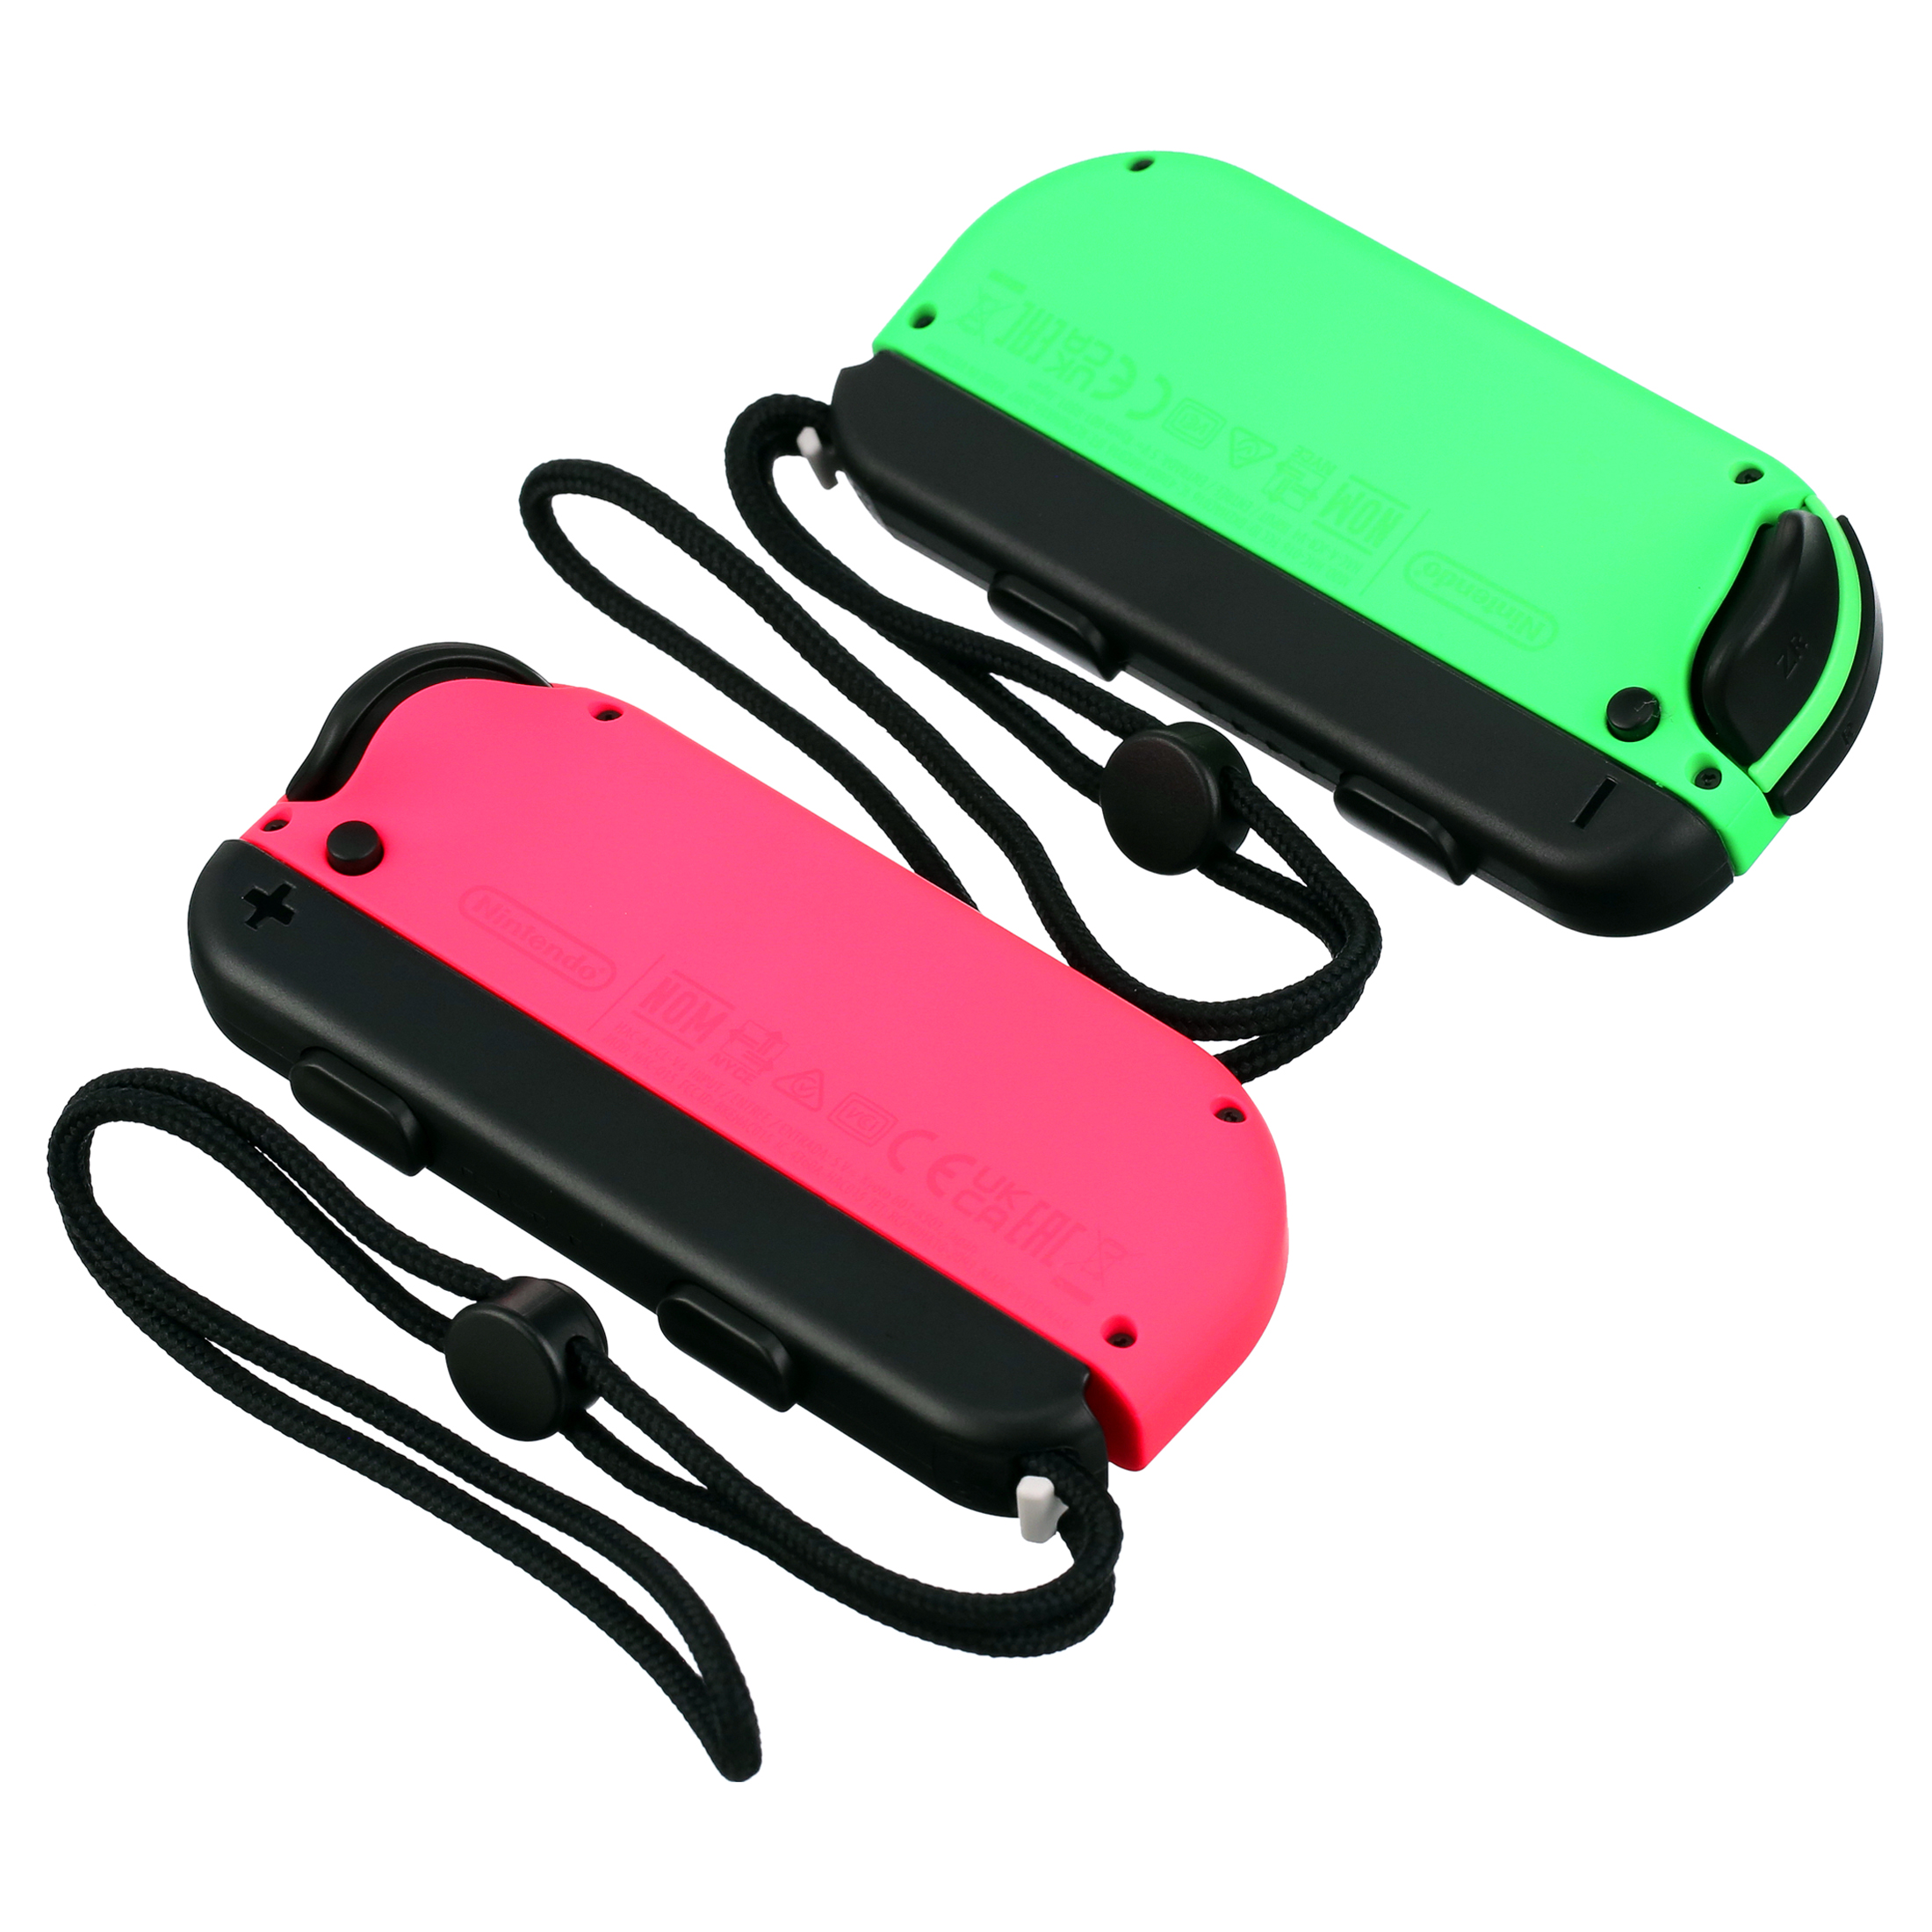 Nintendo Switch Joy-Con Pair, Neon Pink and Neon Green - image 4 of 6